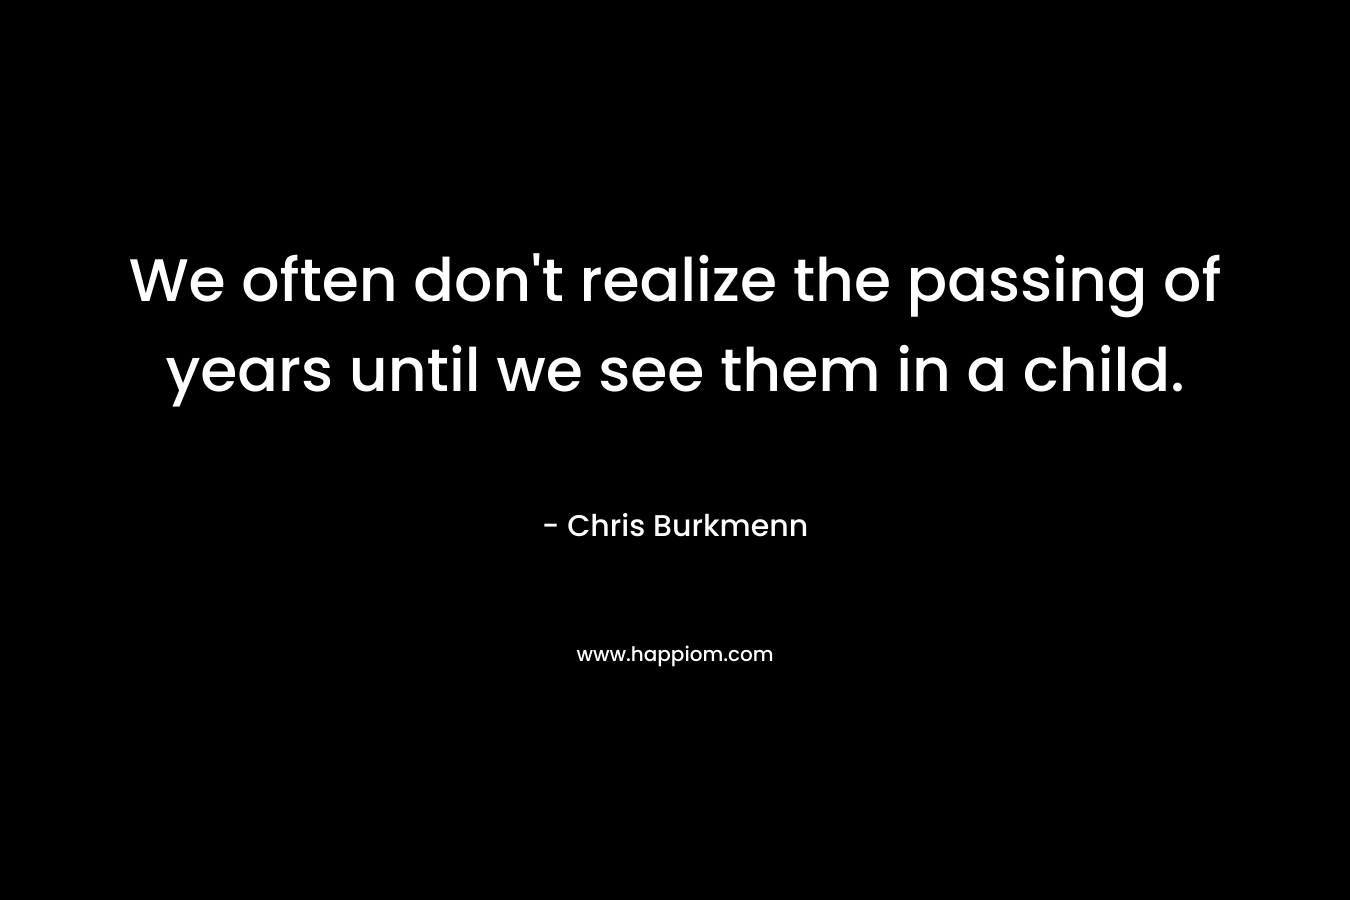 We often don't realize the passing of years until we see them in a child.